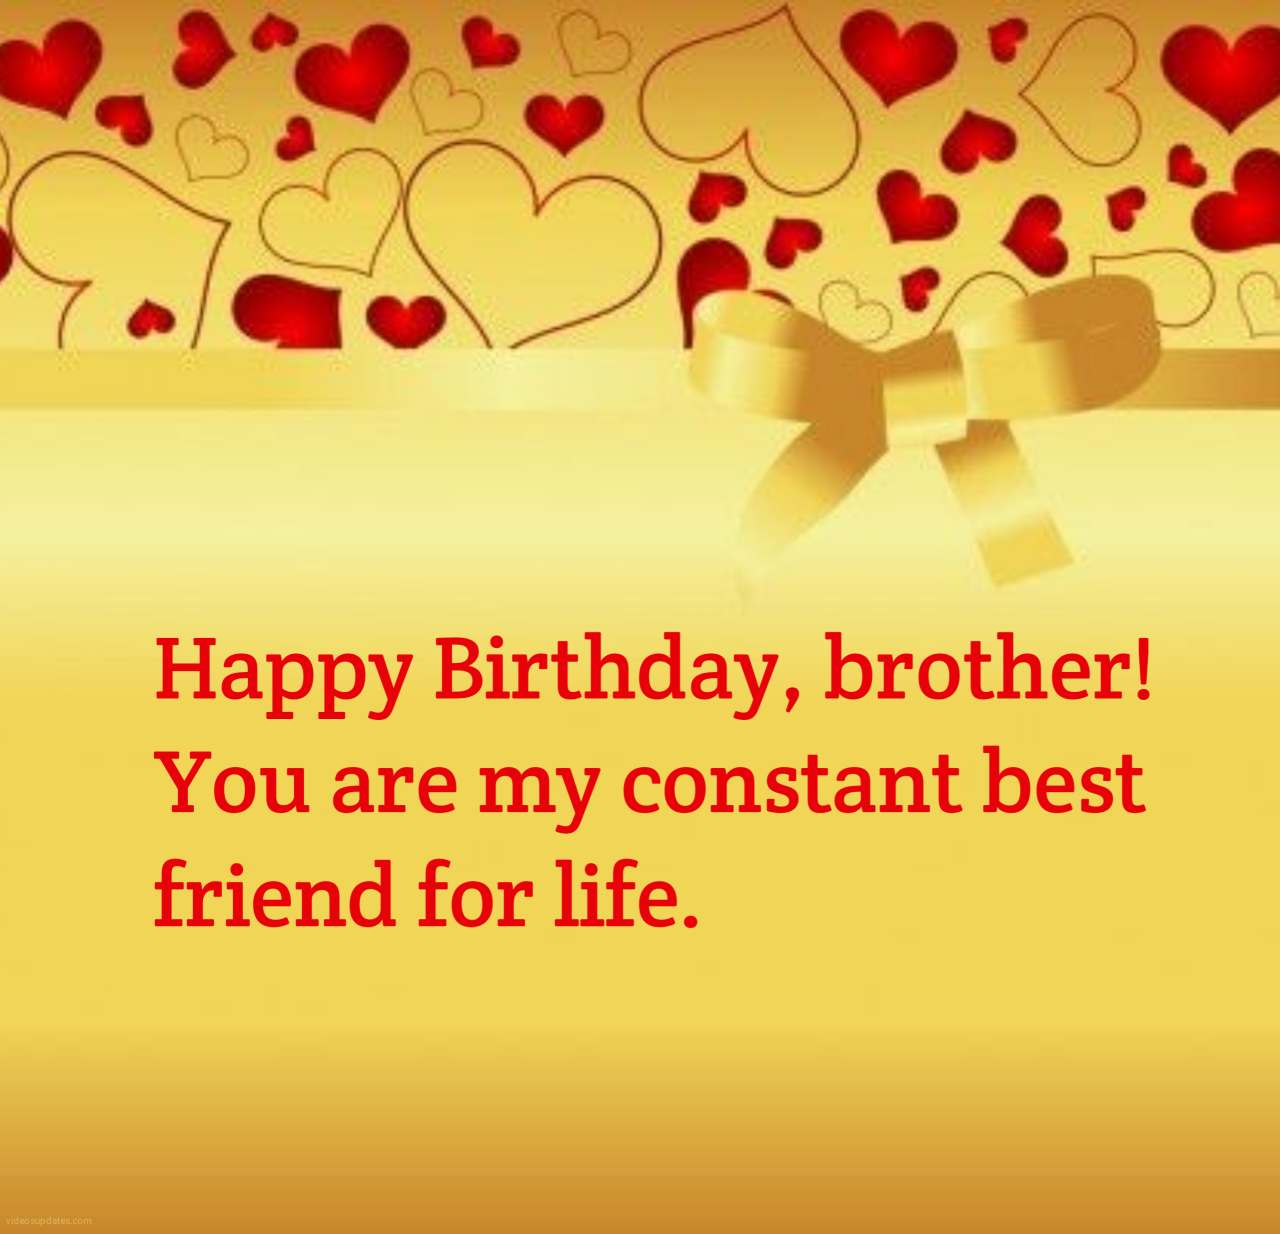 https://videosupdates.com/birthday-wishes-for-brother-from-sister/